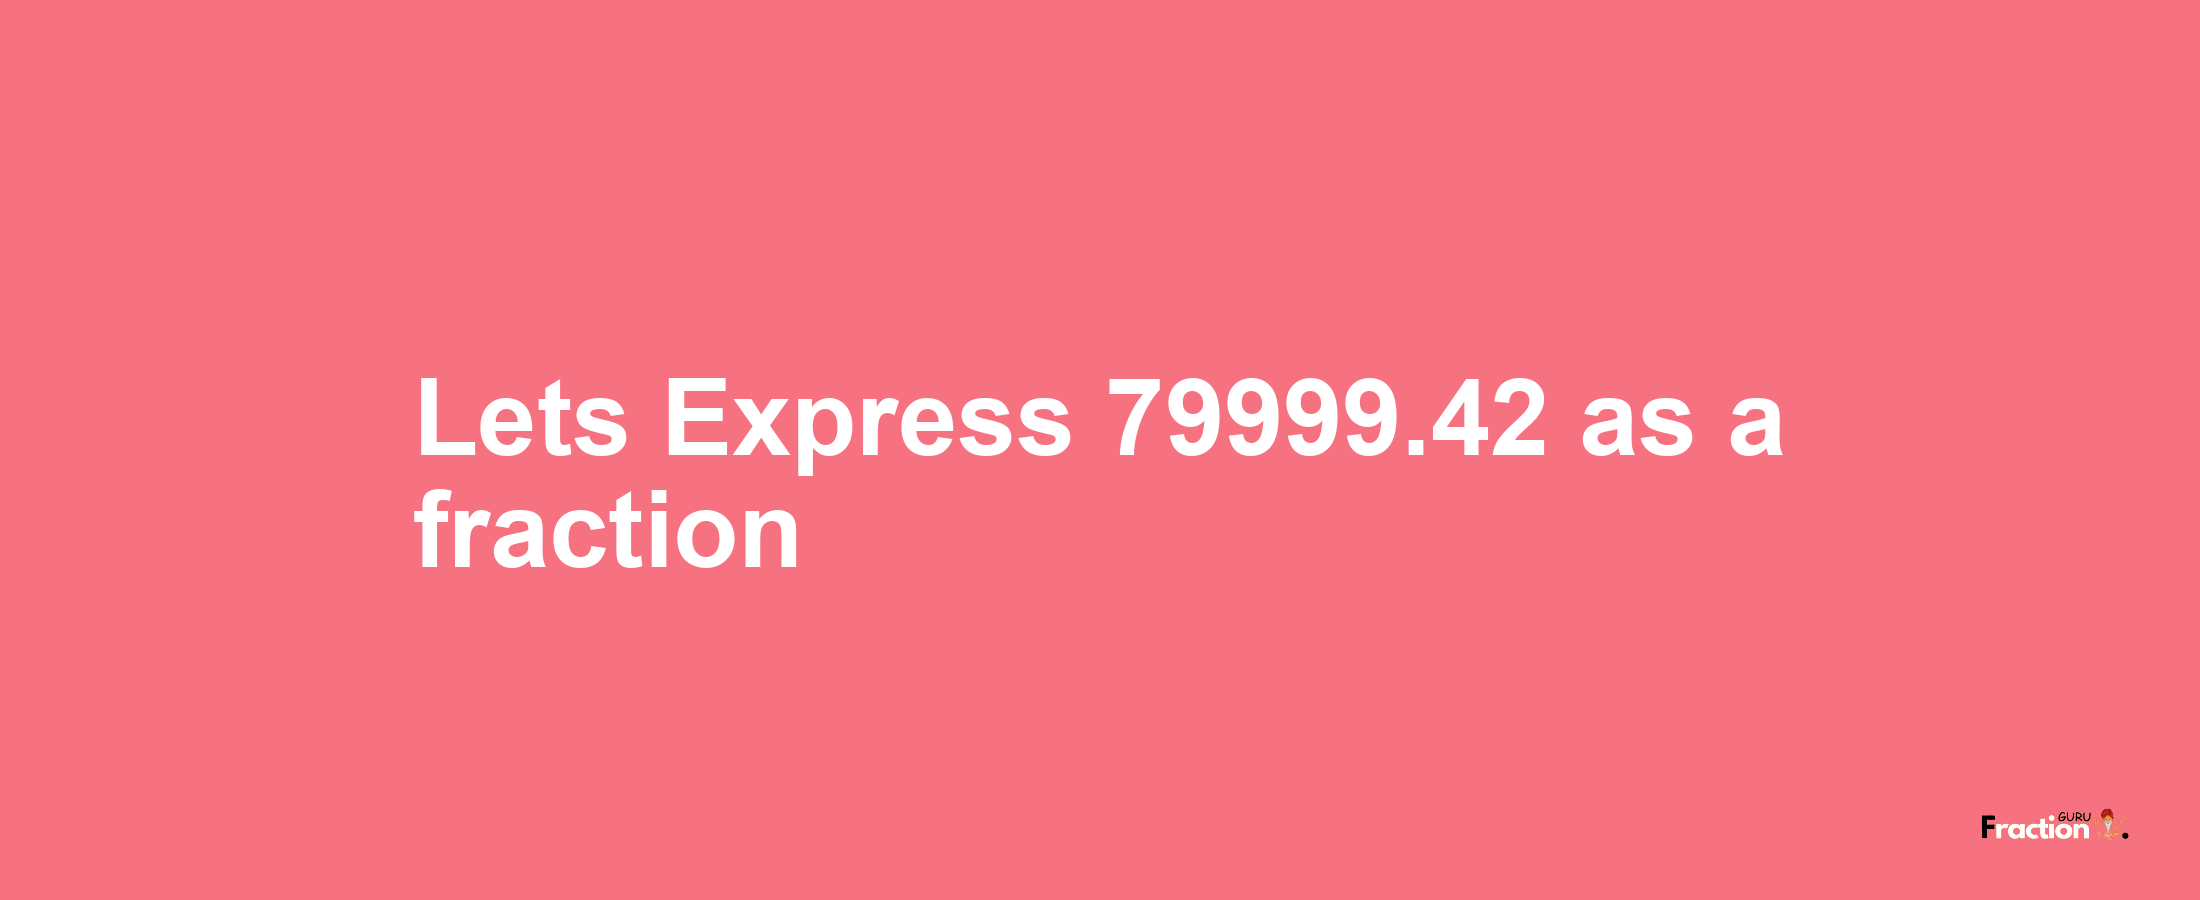 Lets Express 79999.42 as afraction